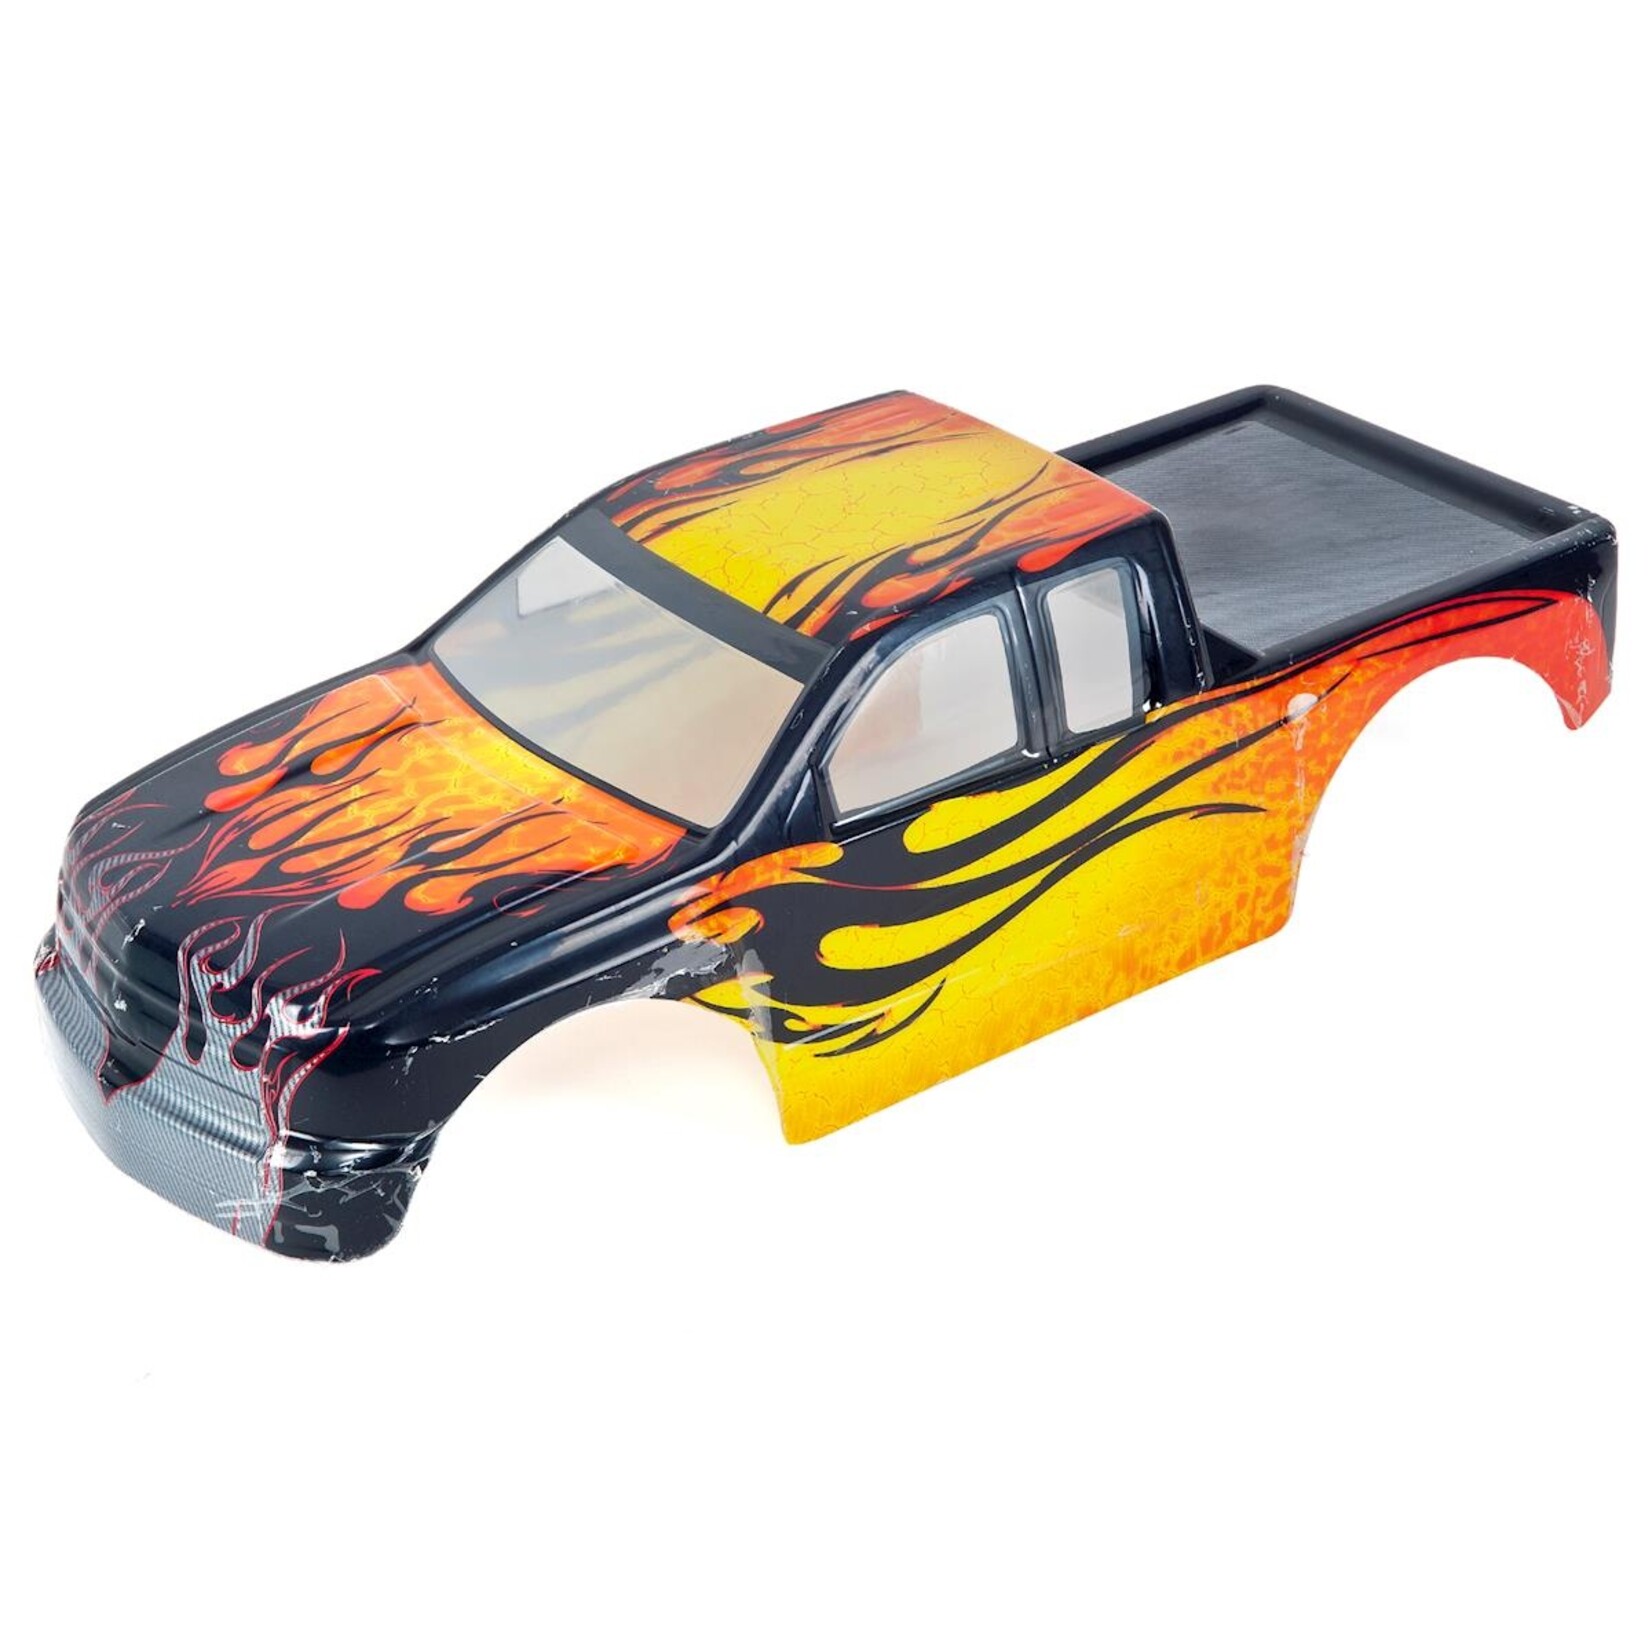 Redcat Racing Redcat Rampage MT Pre-Painted Monster Truck Body (Yellow w/Black Flames) #14050-Y